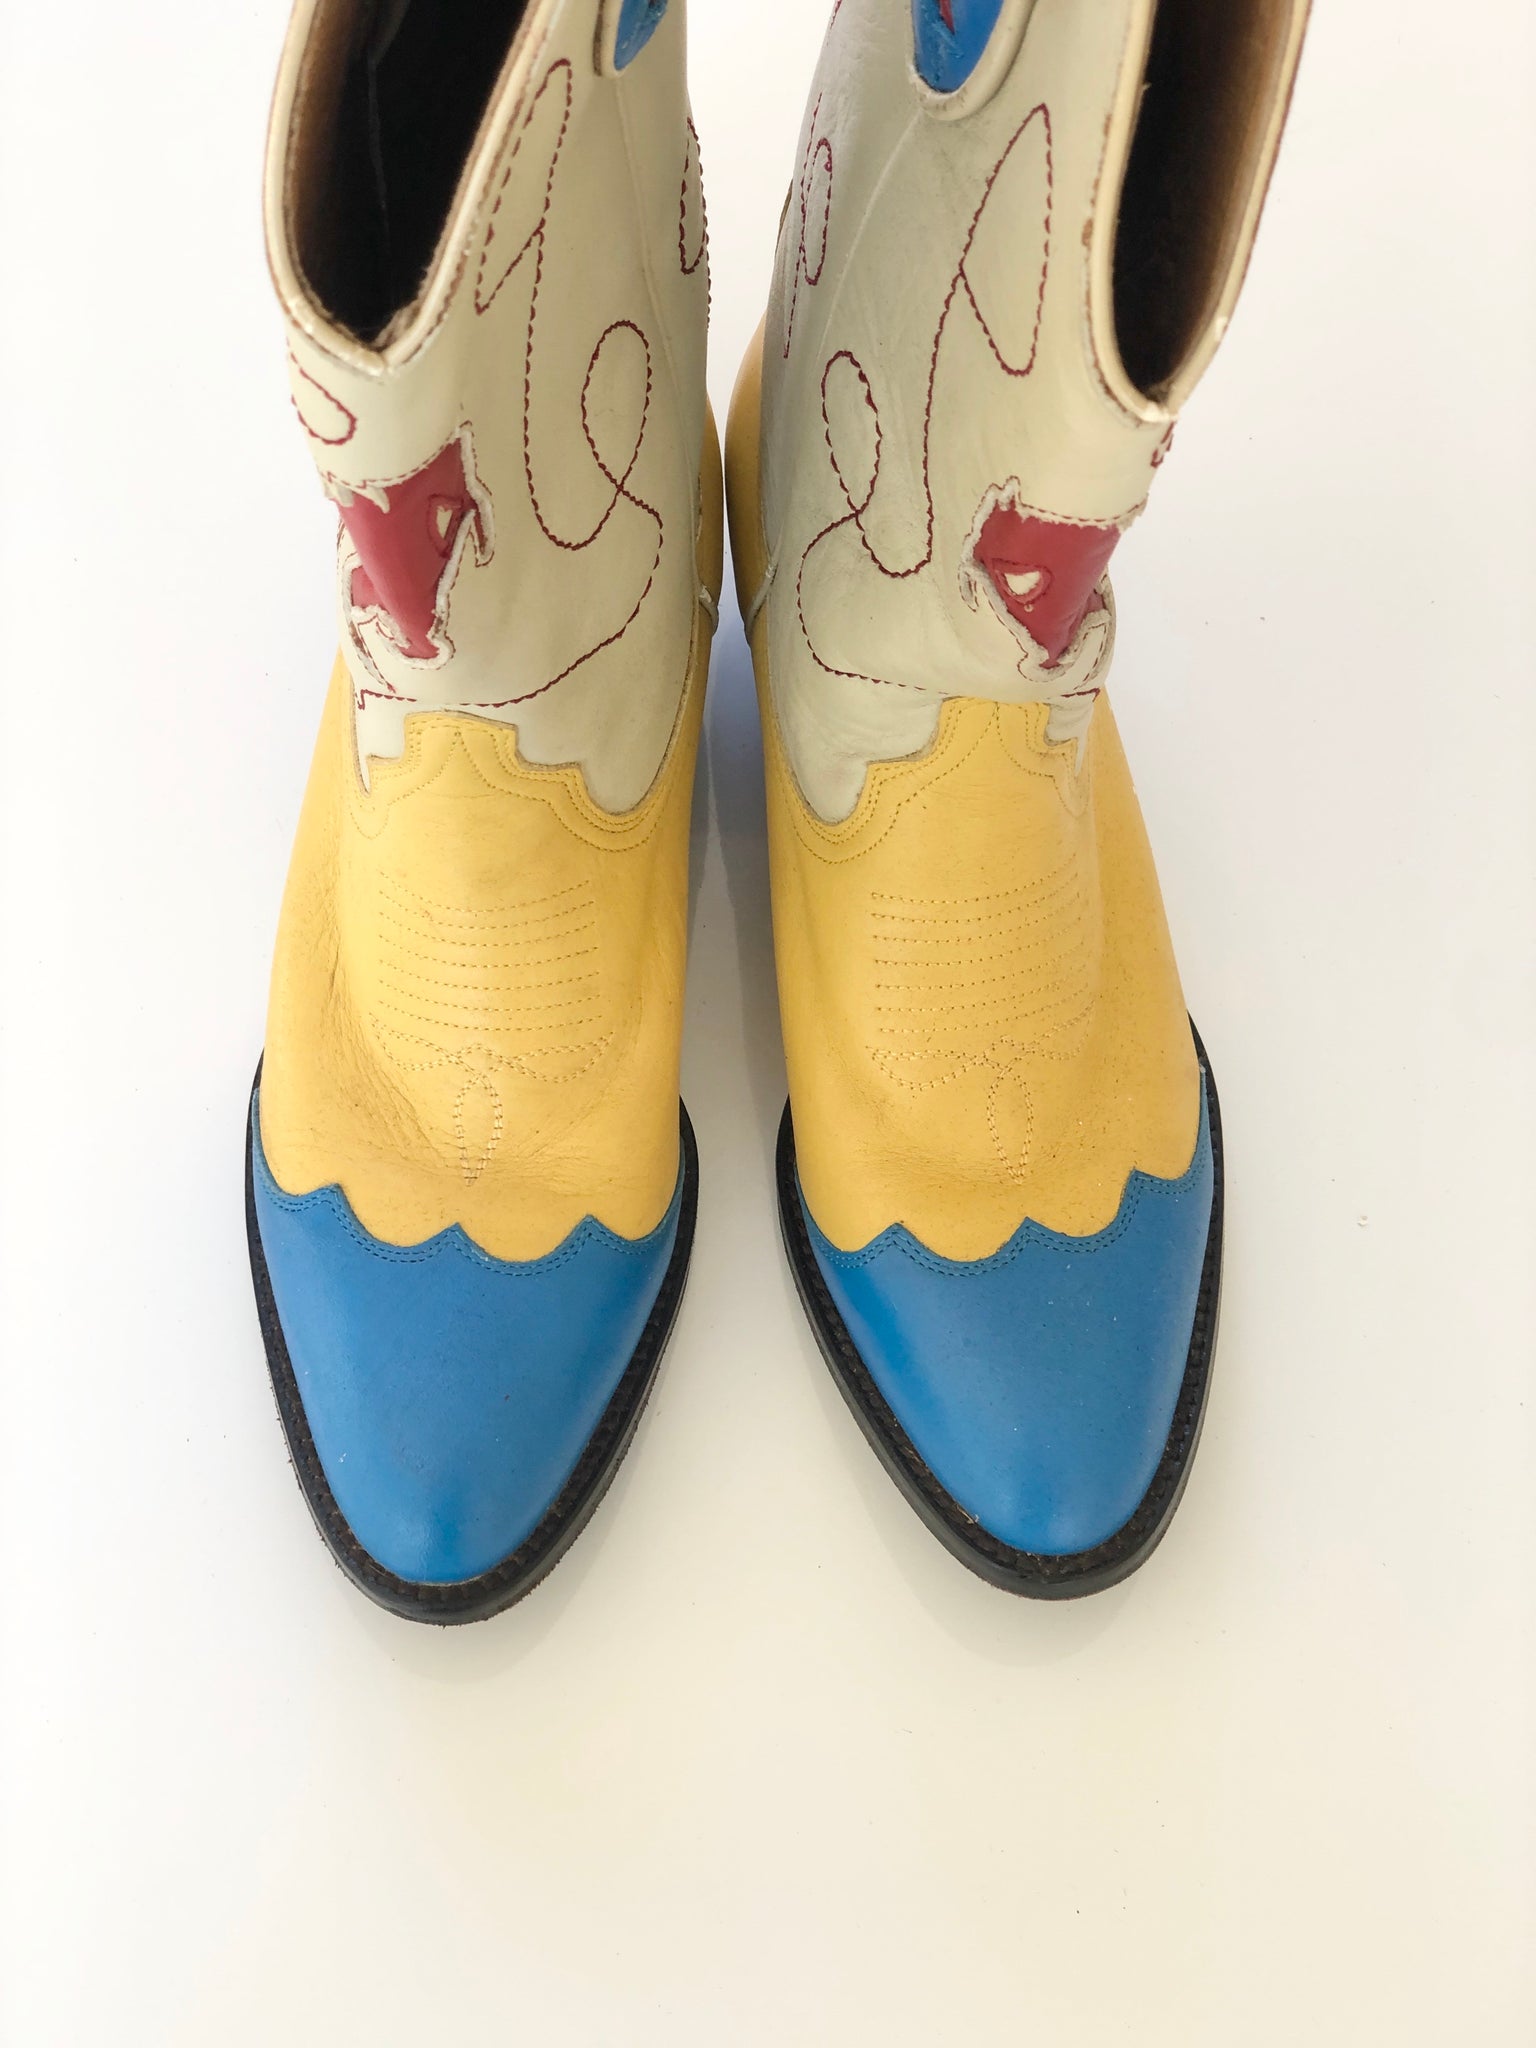 VINTAGE: Multi-Colored Rodeo Cowboy Boots